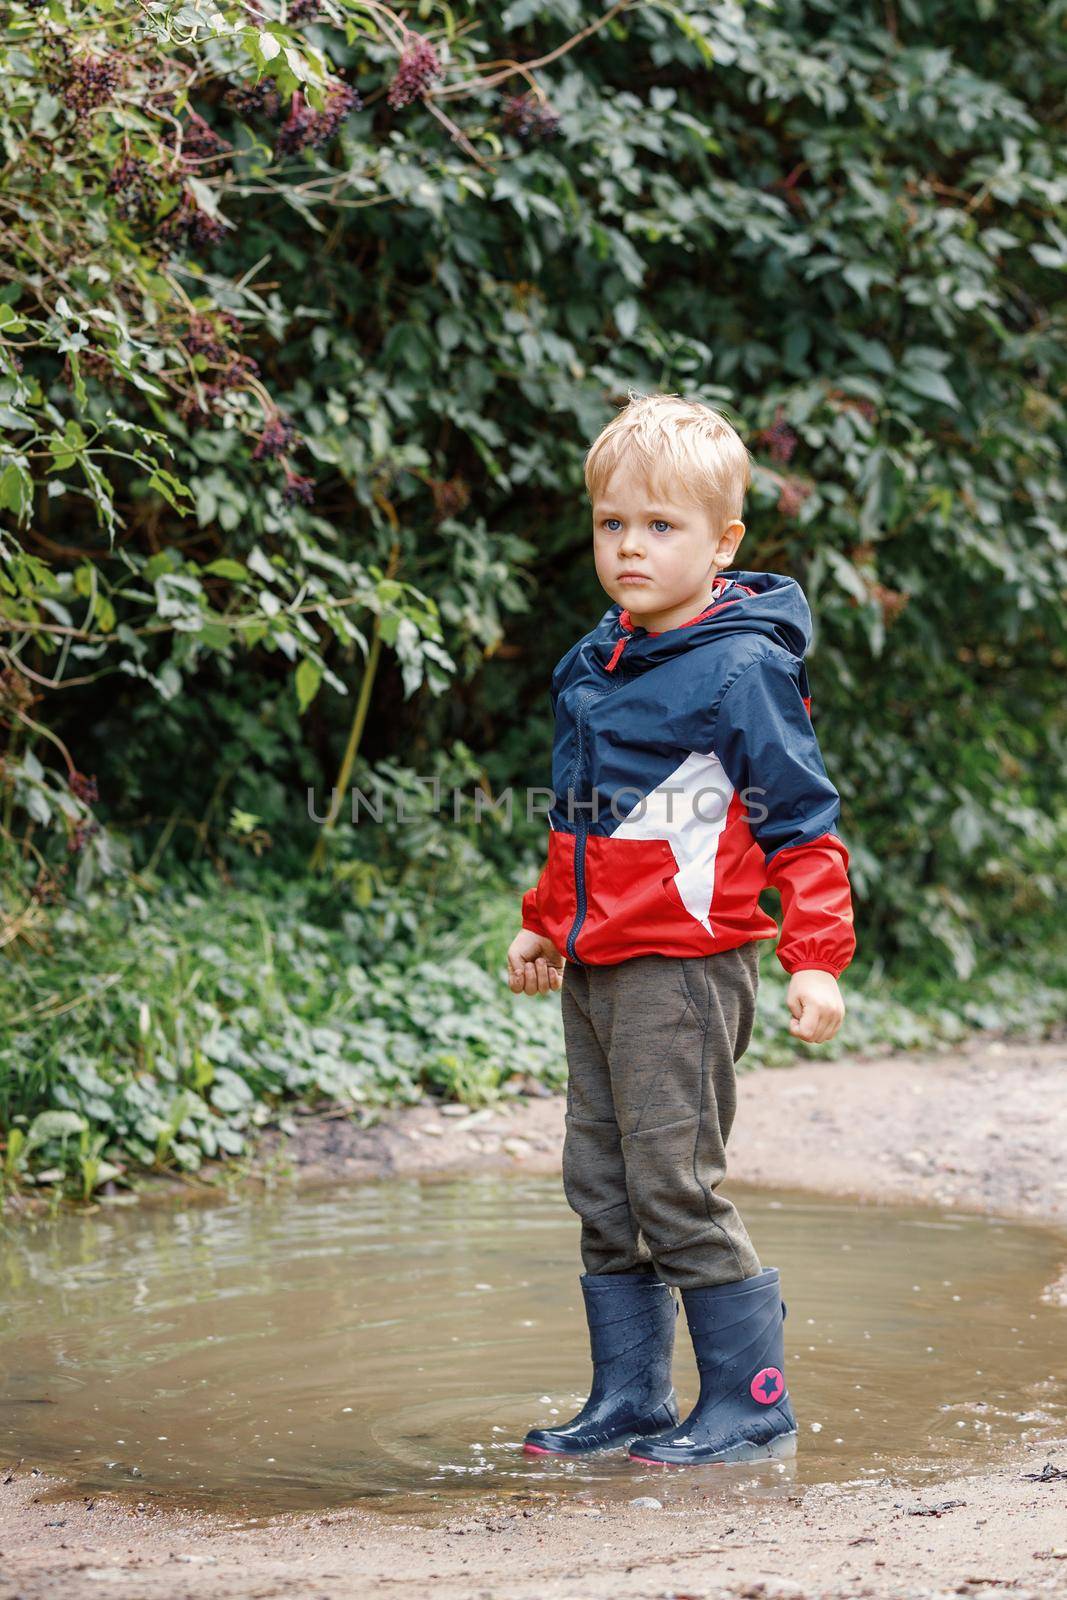 Kid playing autumn park. Outdoor fun by any weather. Standing In a Muddy Puddle.